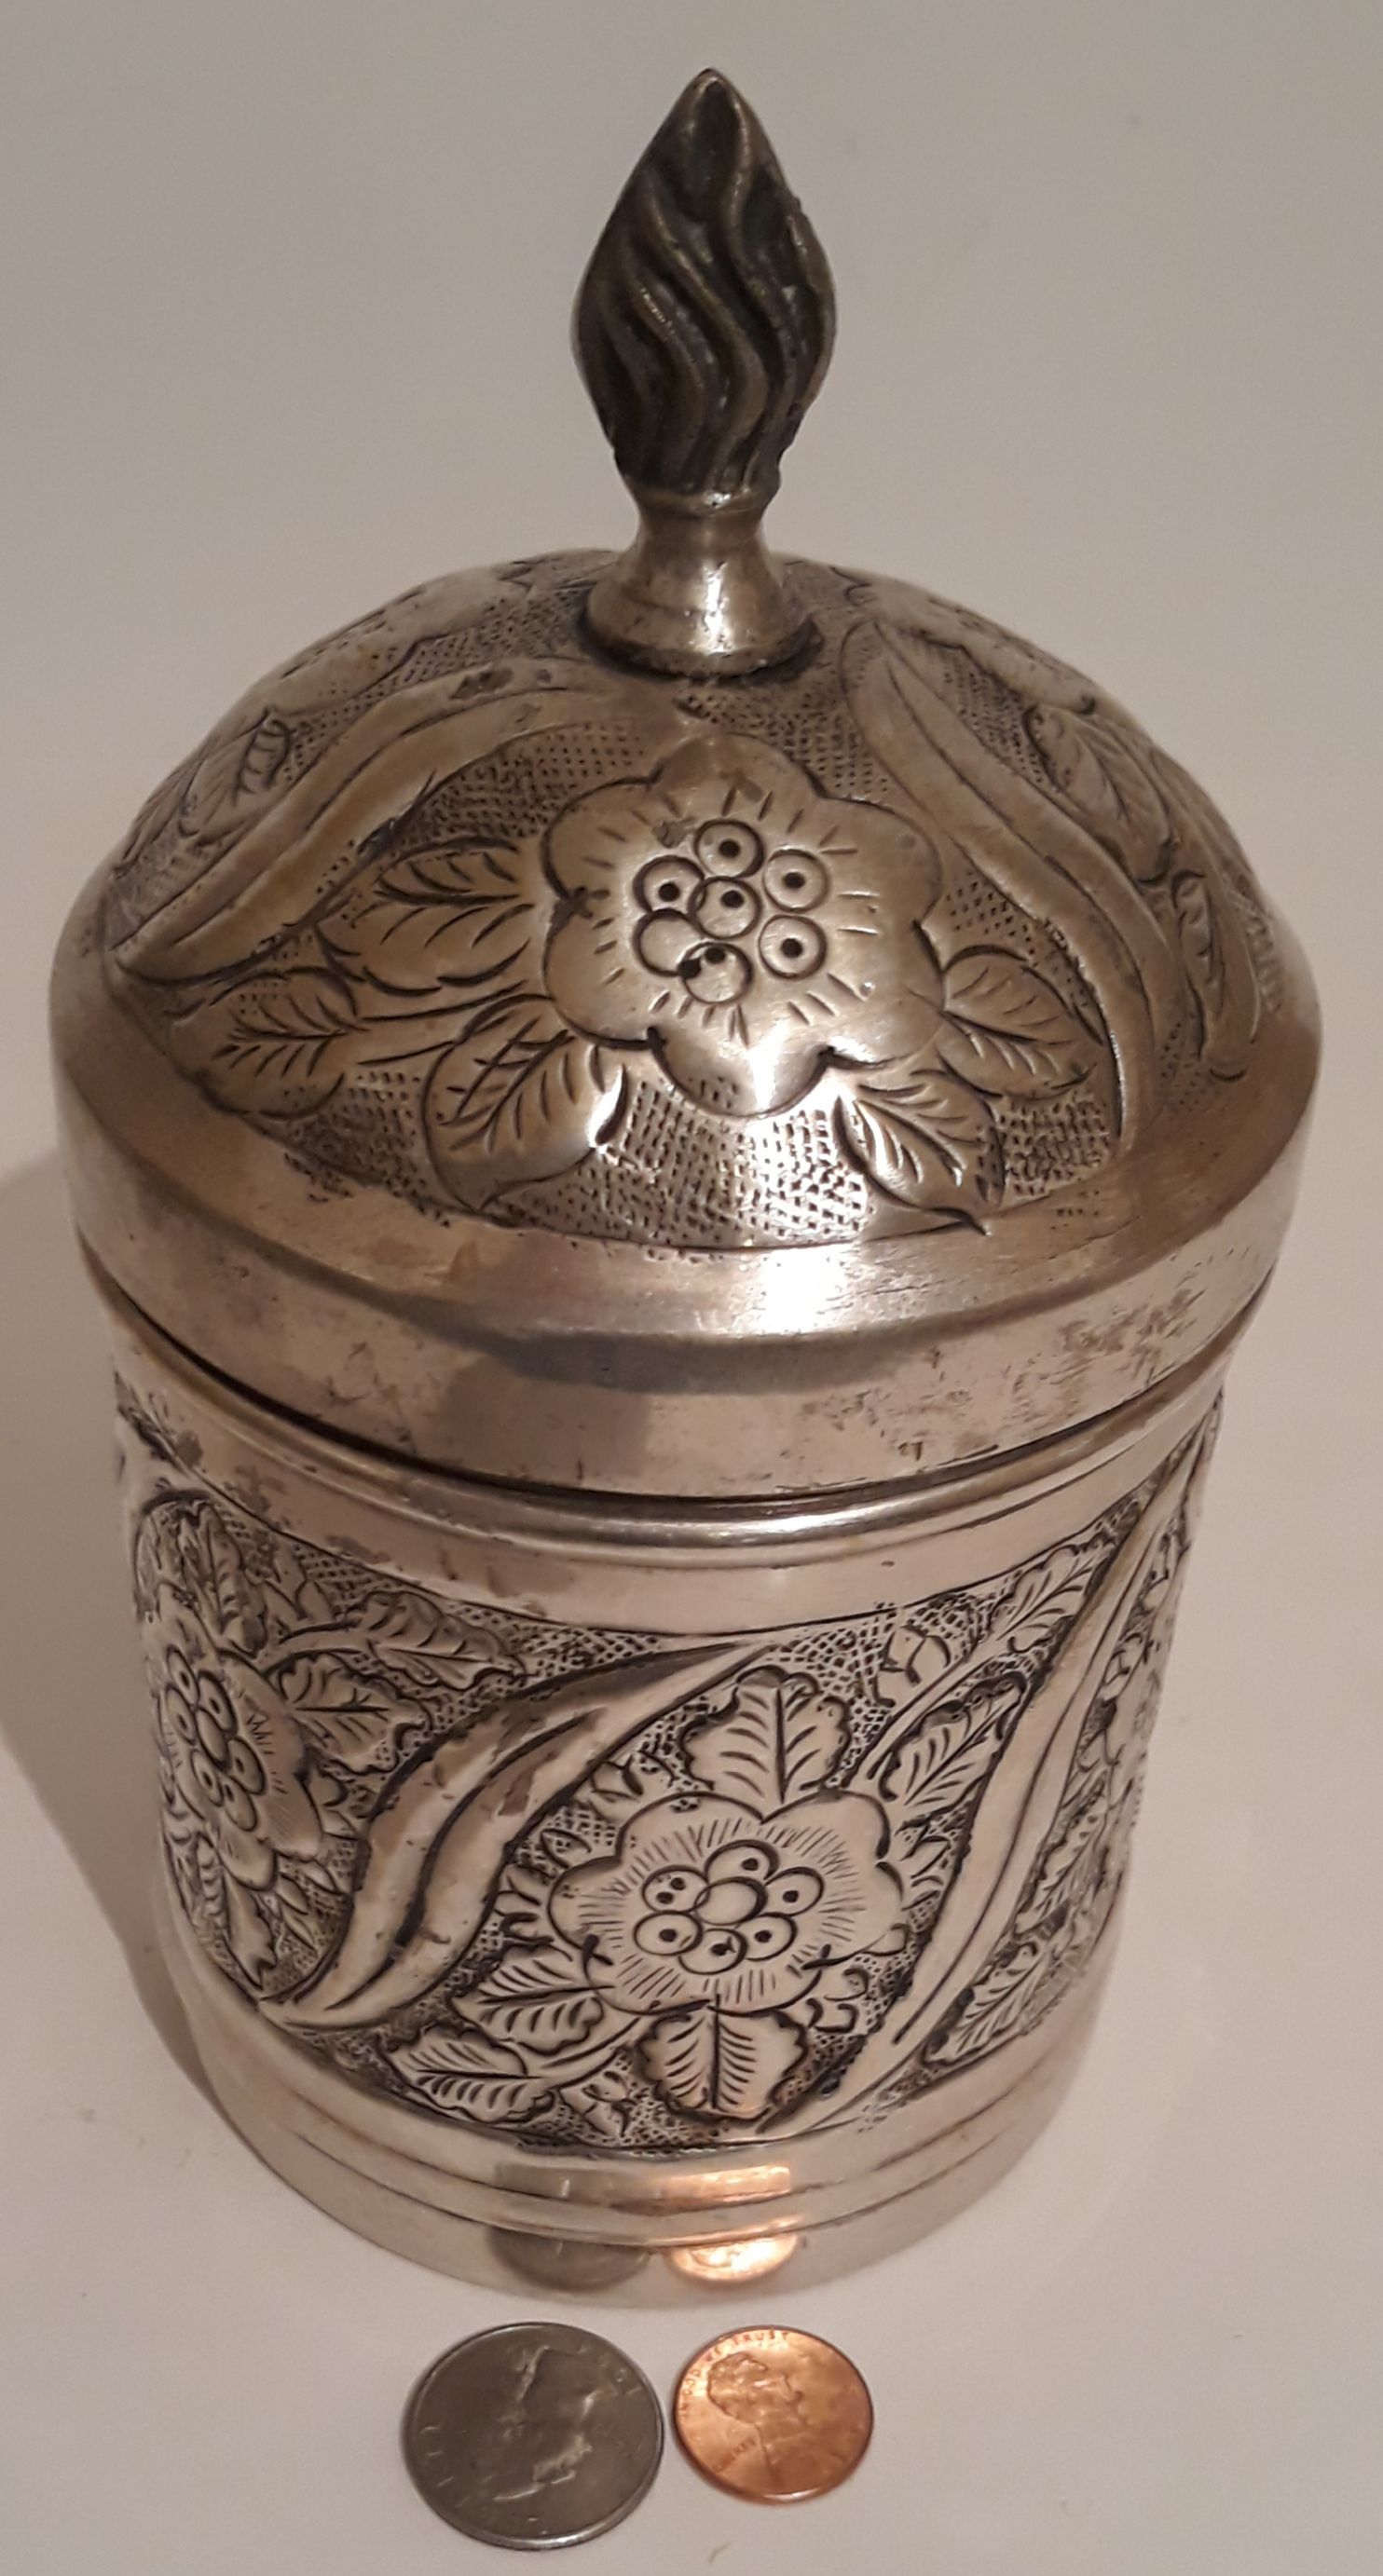 Vintage Silver Plated Metal Container, Storage Box, Stash Box, 7 1/2" x 4", Heavy Duty Quality, Flower Design, This Can Be Shined Up Even More